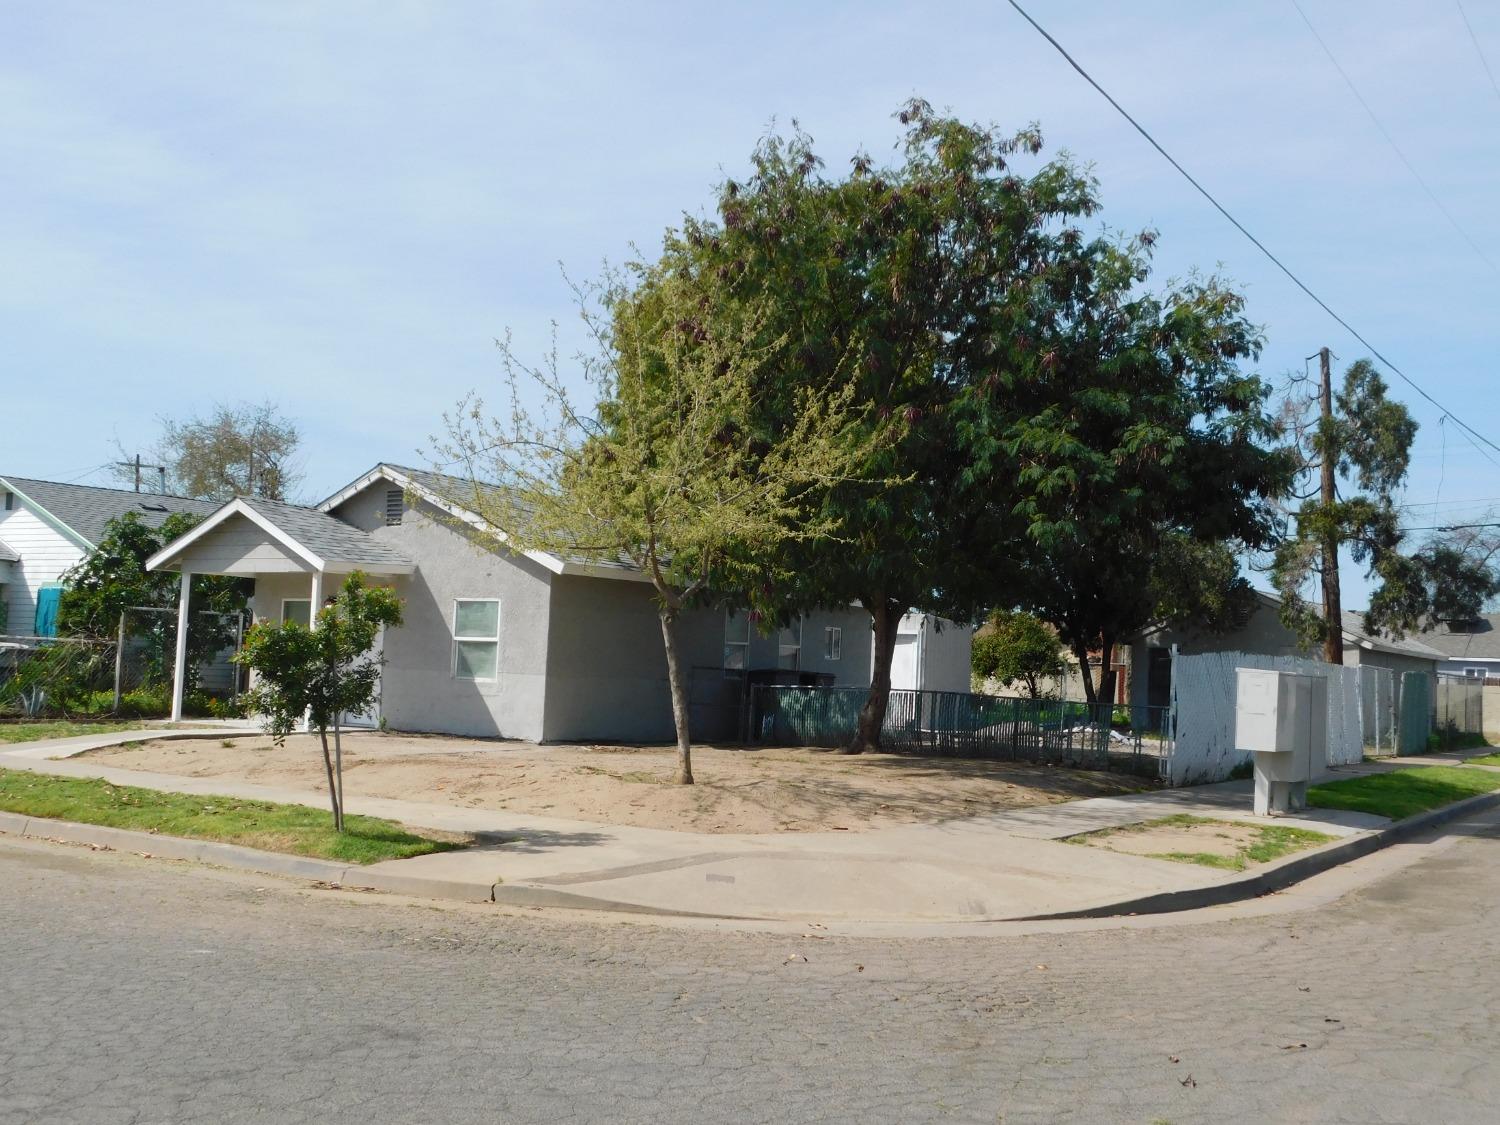 Photo of 2356 S Holly Ave in Fresno, CA